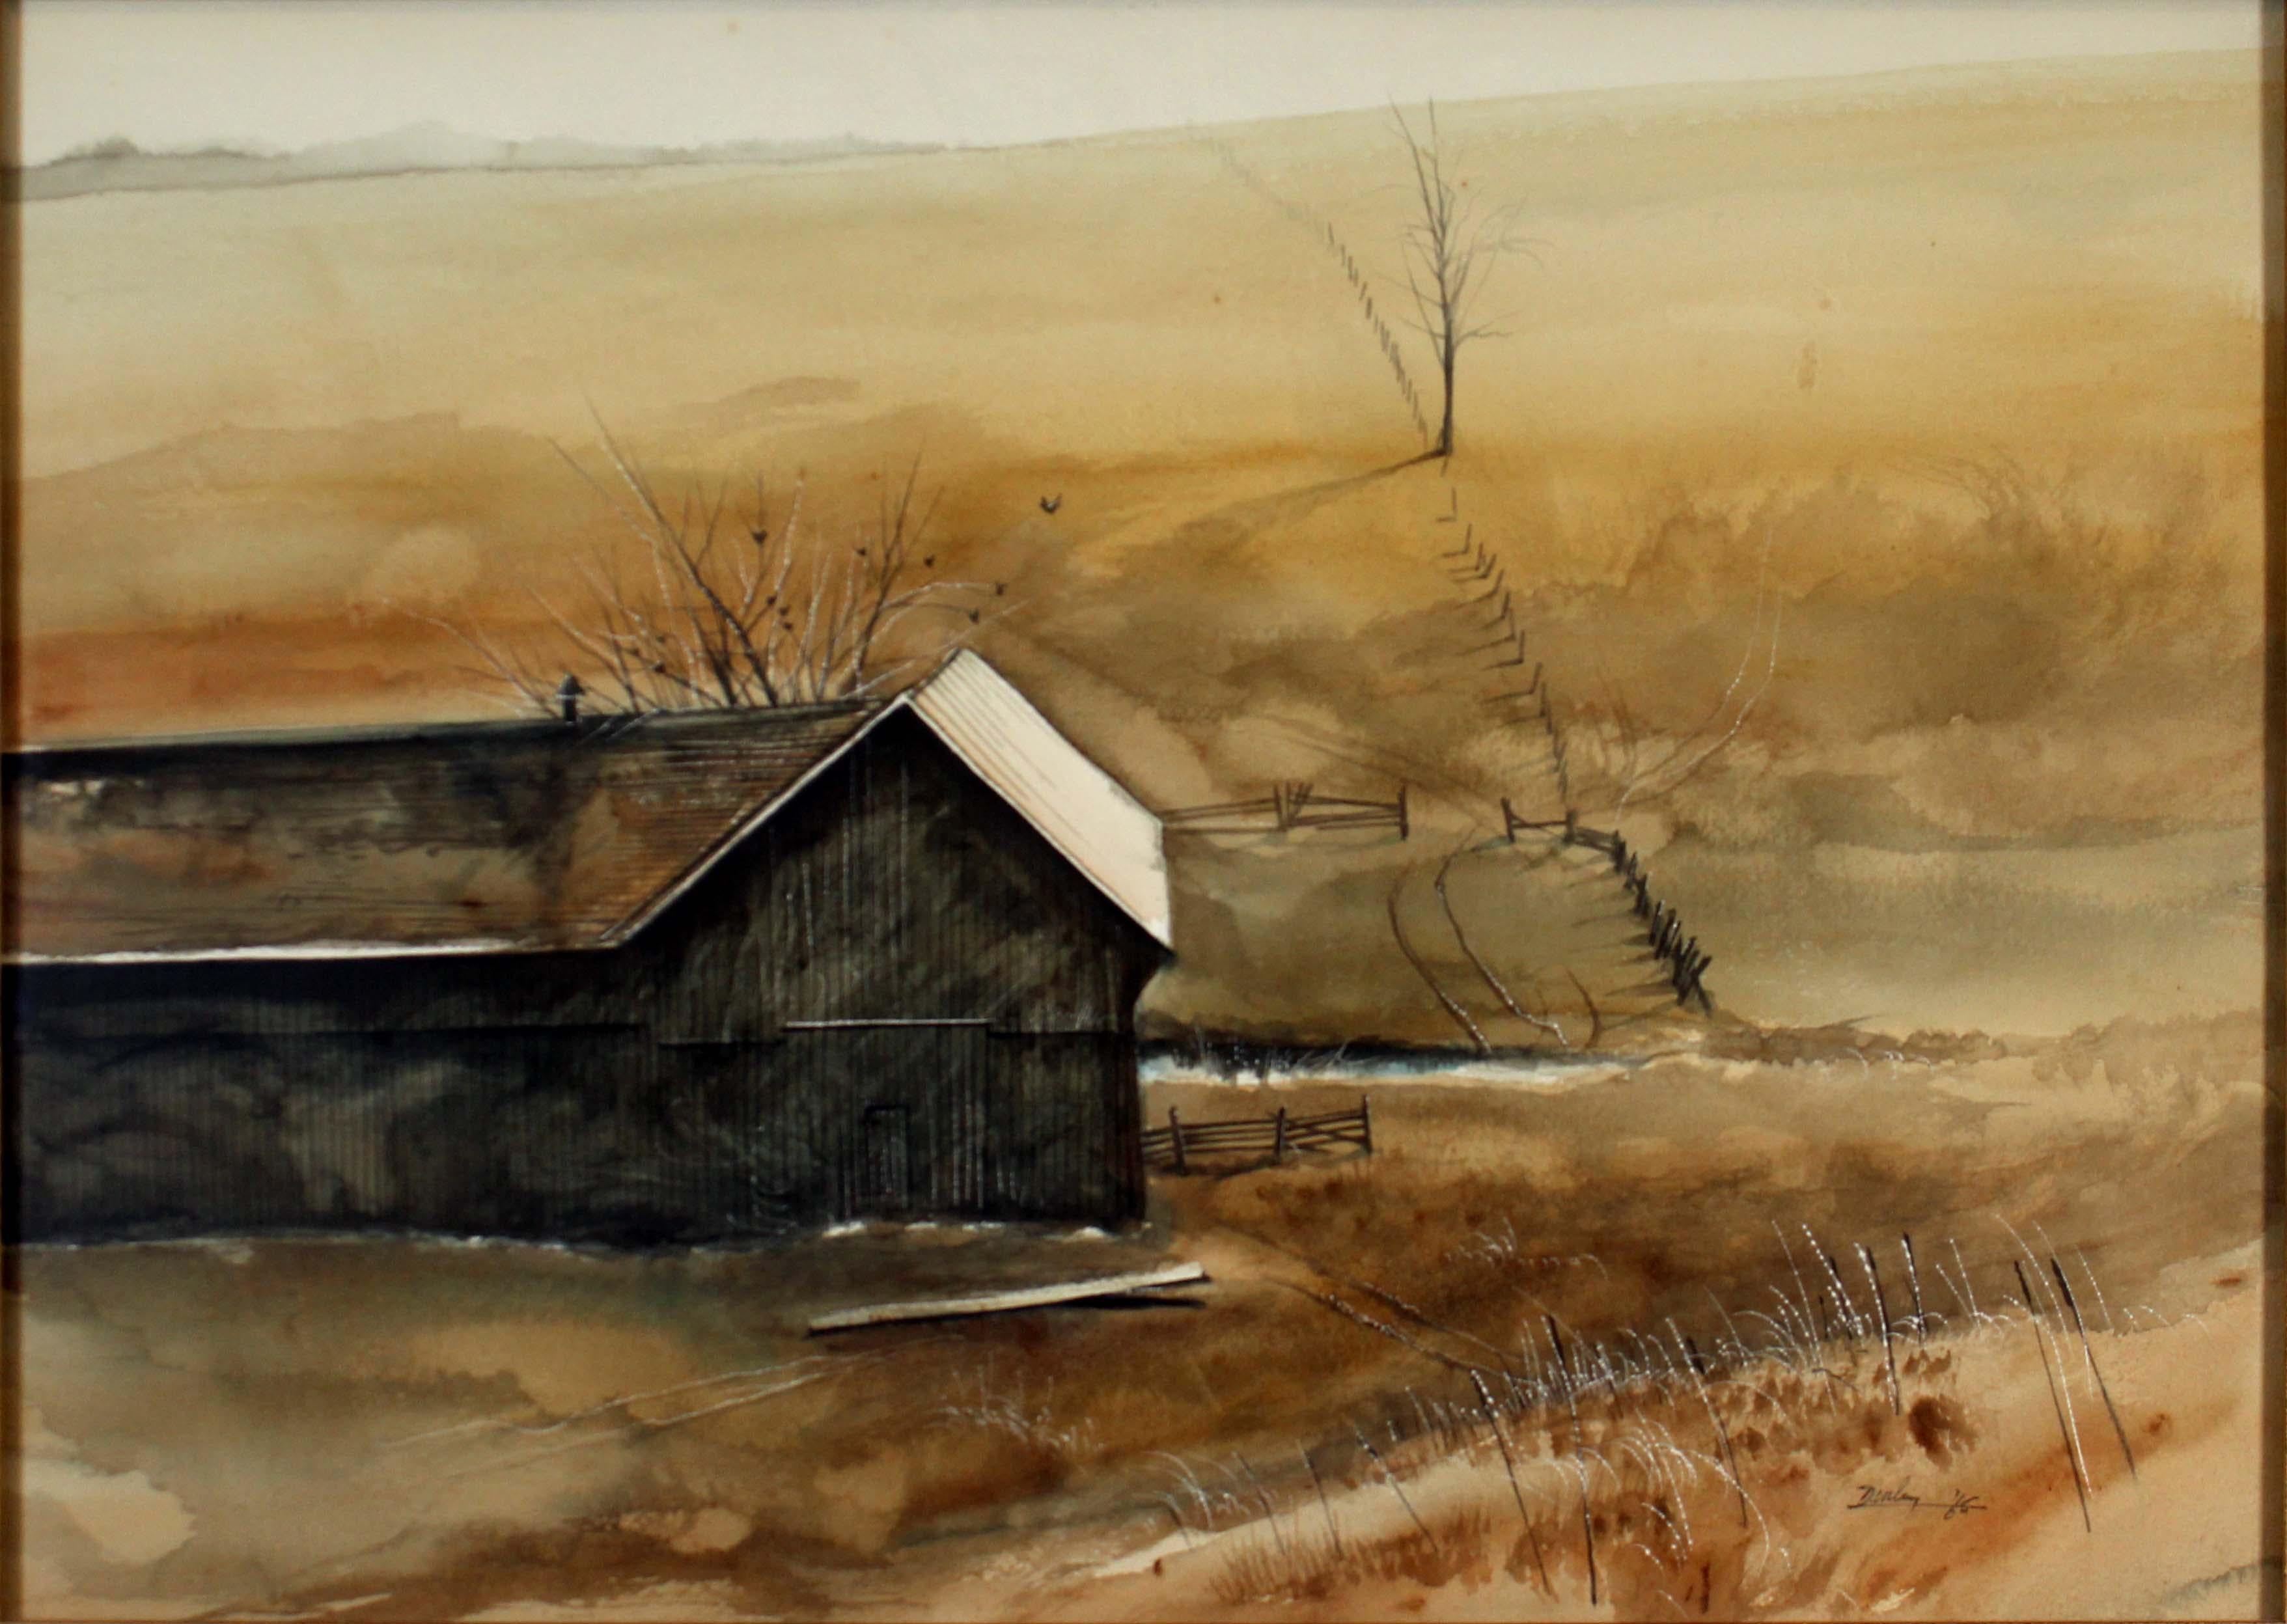 A serene and somber watercolor on paper depicting a barn in a country landscape by Canadian artist Ken Edison Danby. Signed on the bottom right with a 1965 date. A nostalgic subject matter showcasing simple times on a idyllic peaceful farm. From a